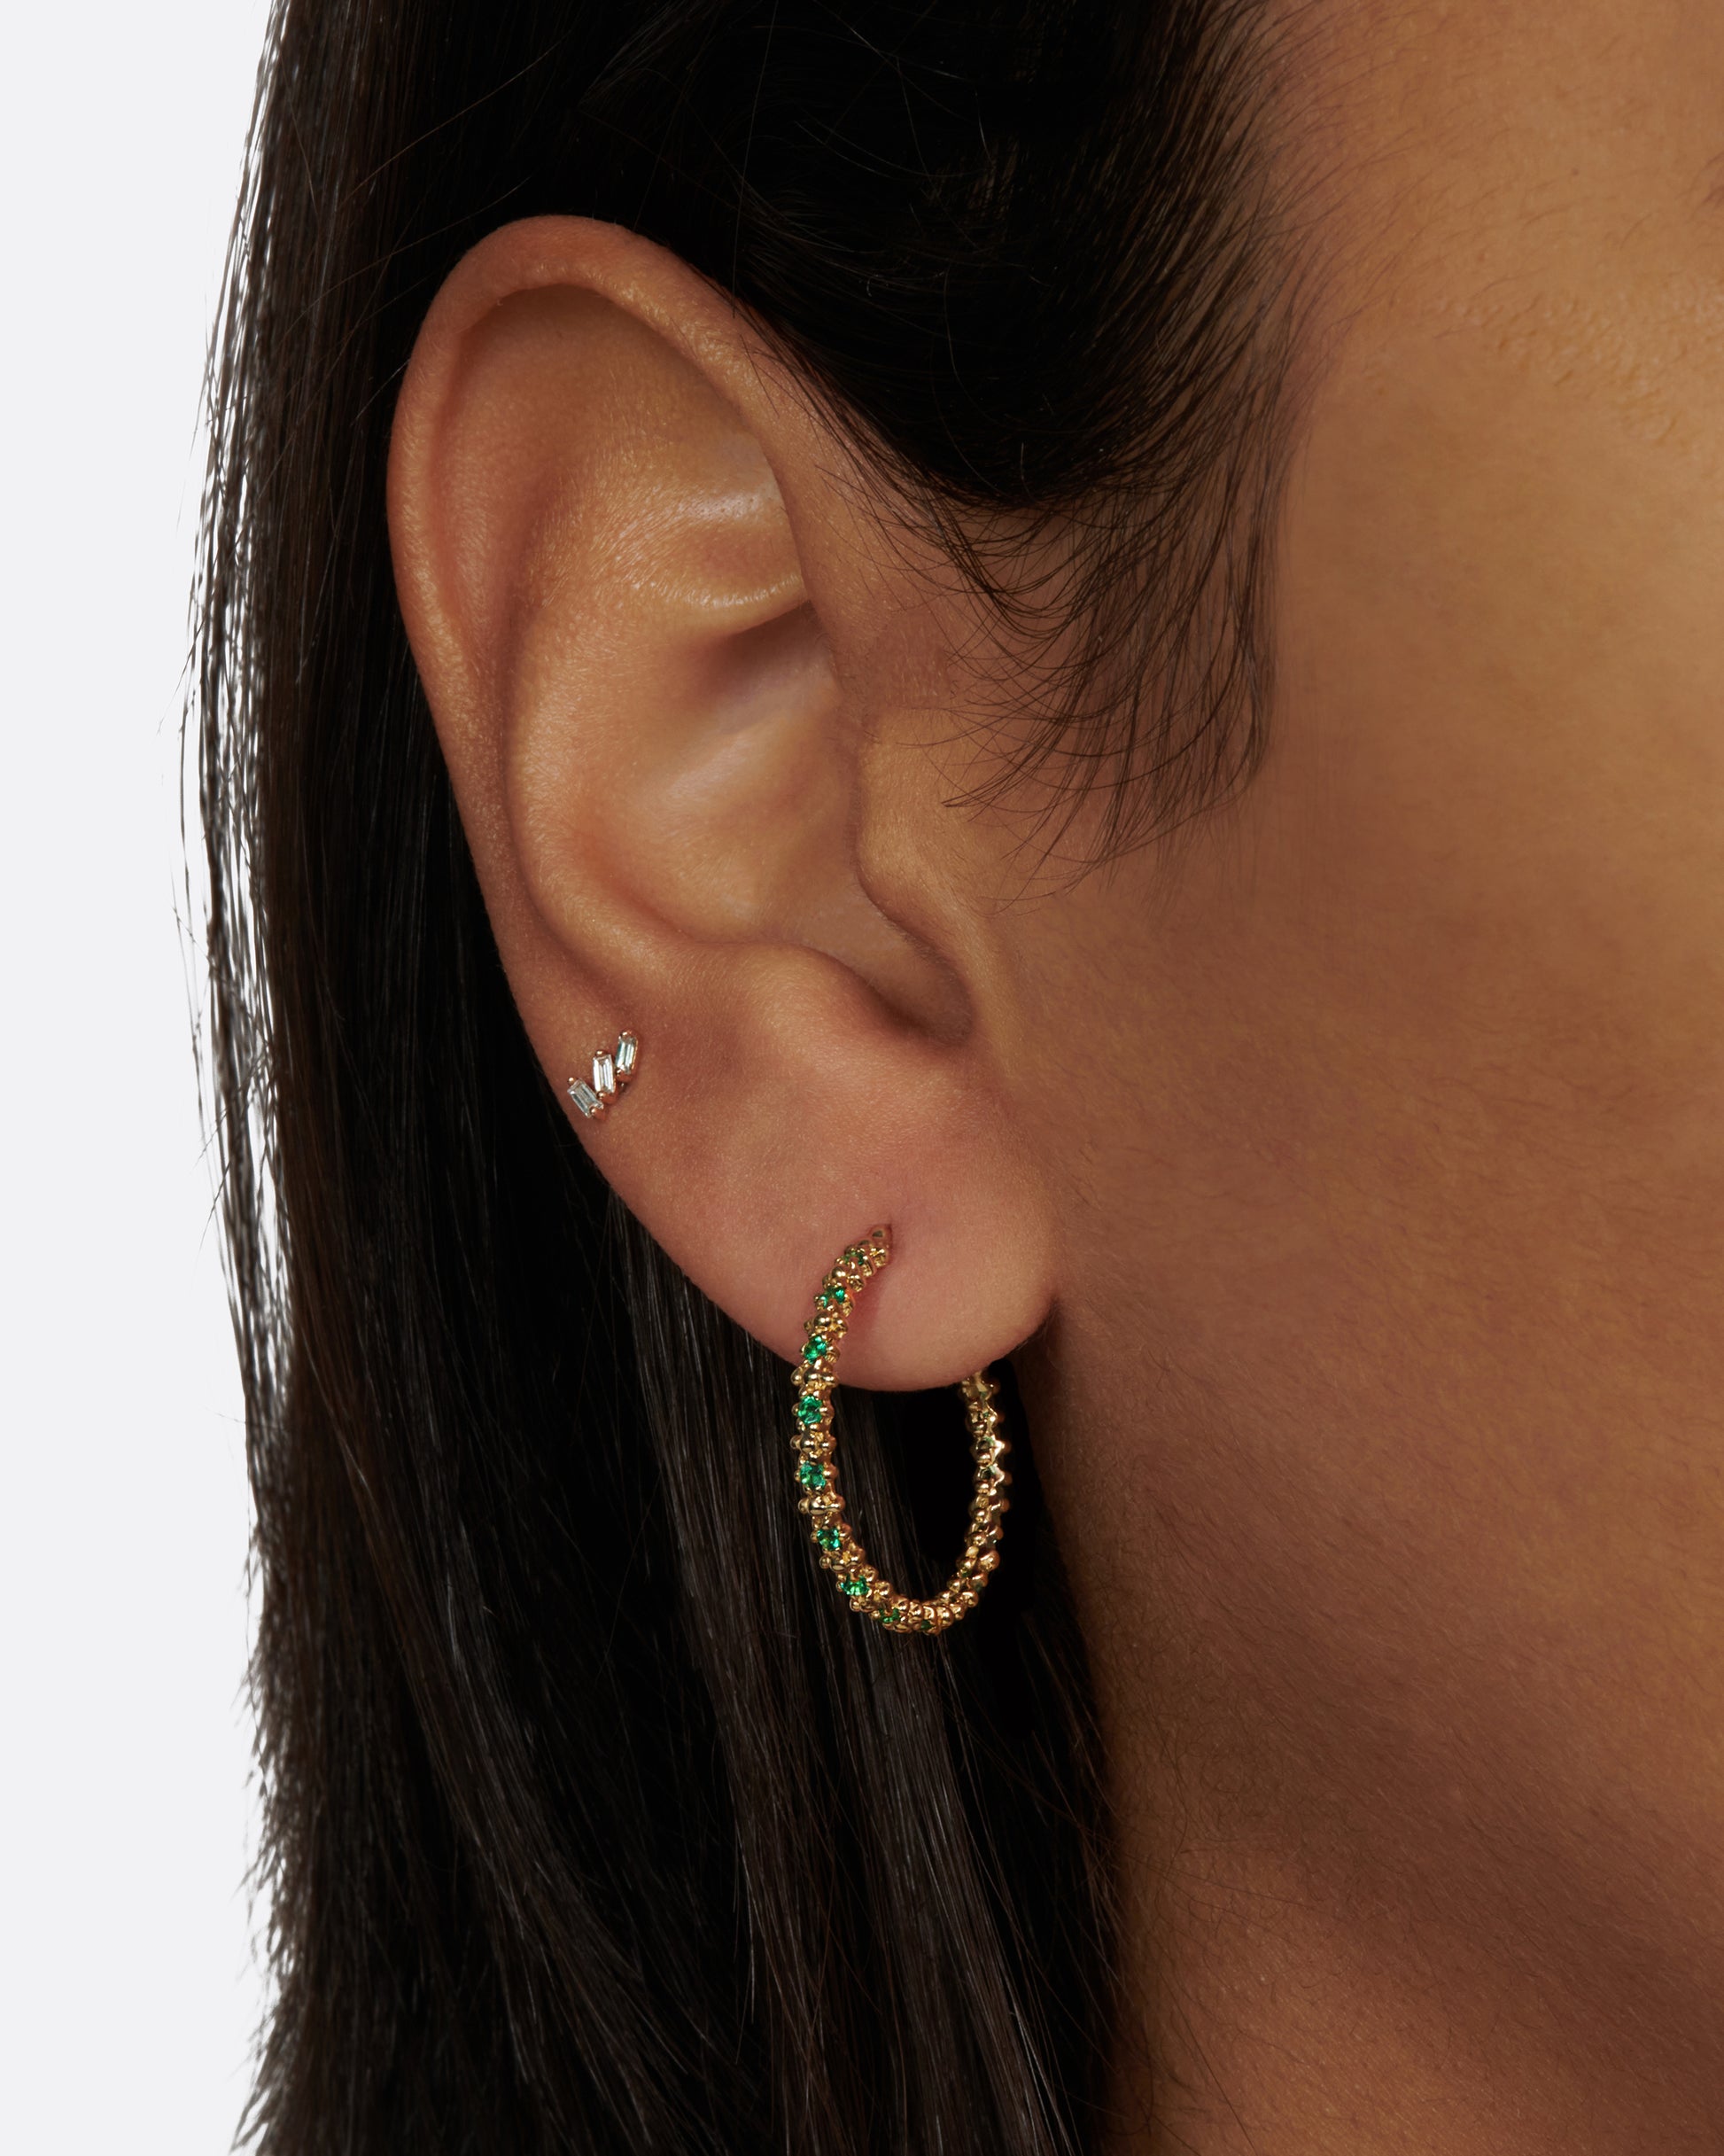 A pair of textured hoop earrings with emeralds dotted throughout.